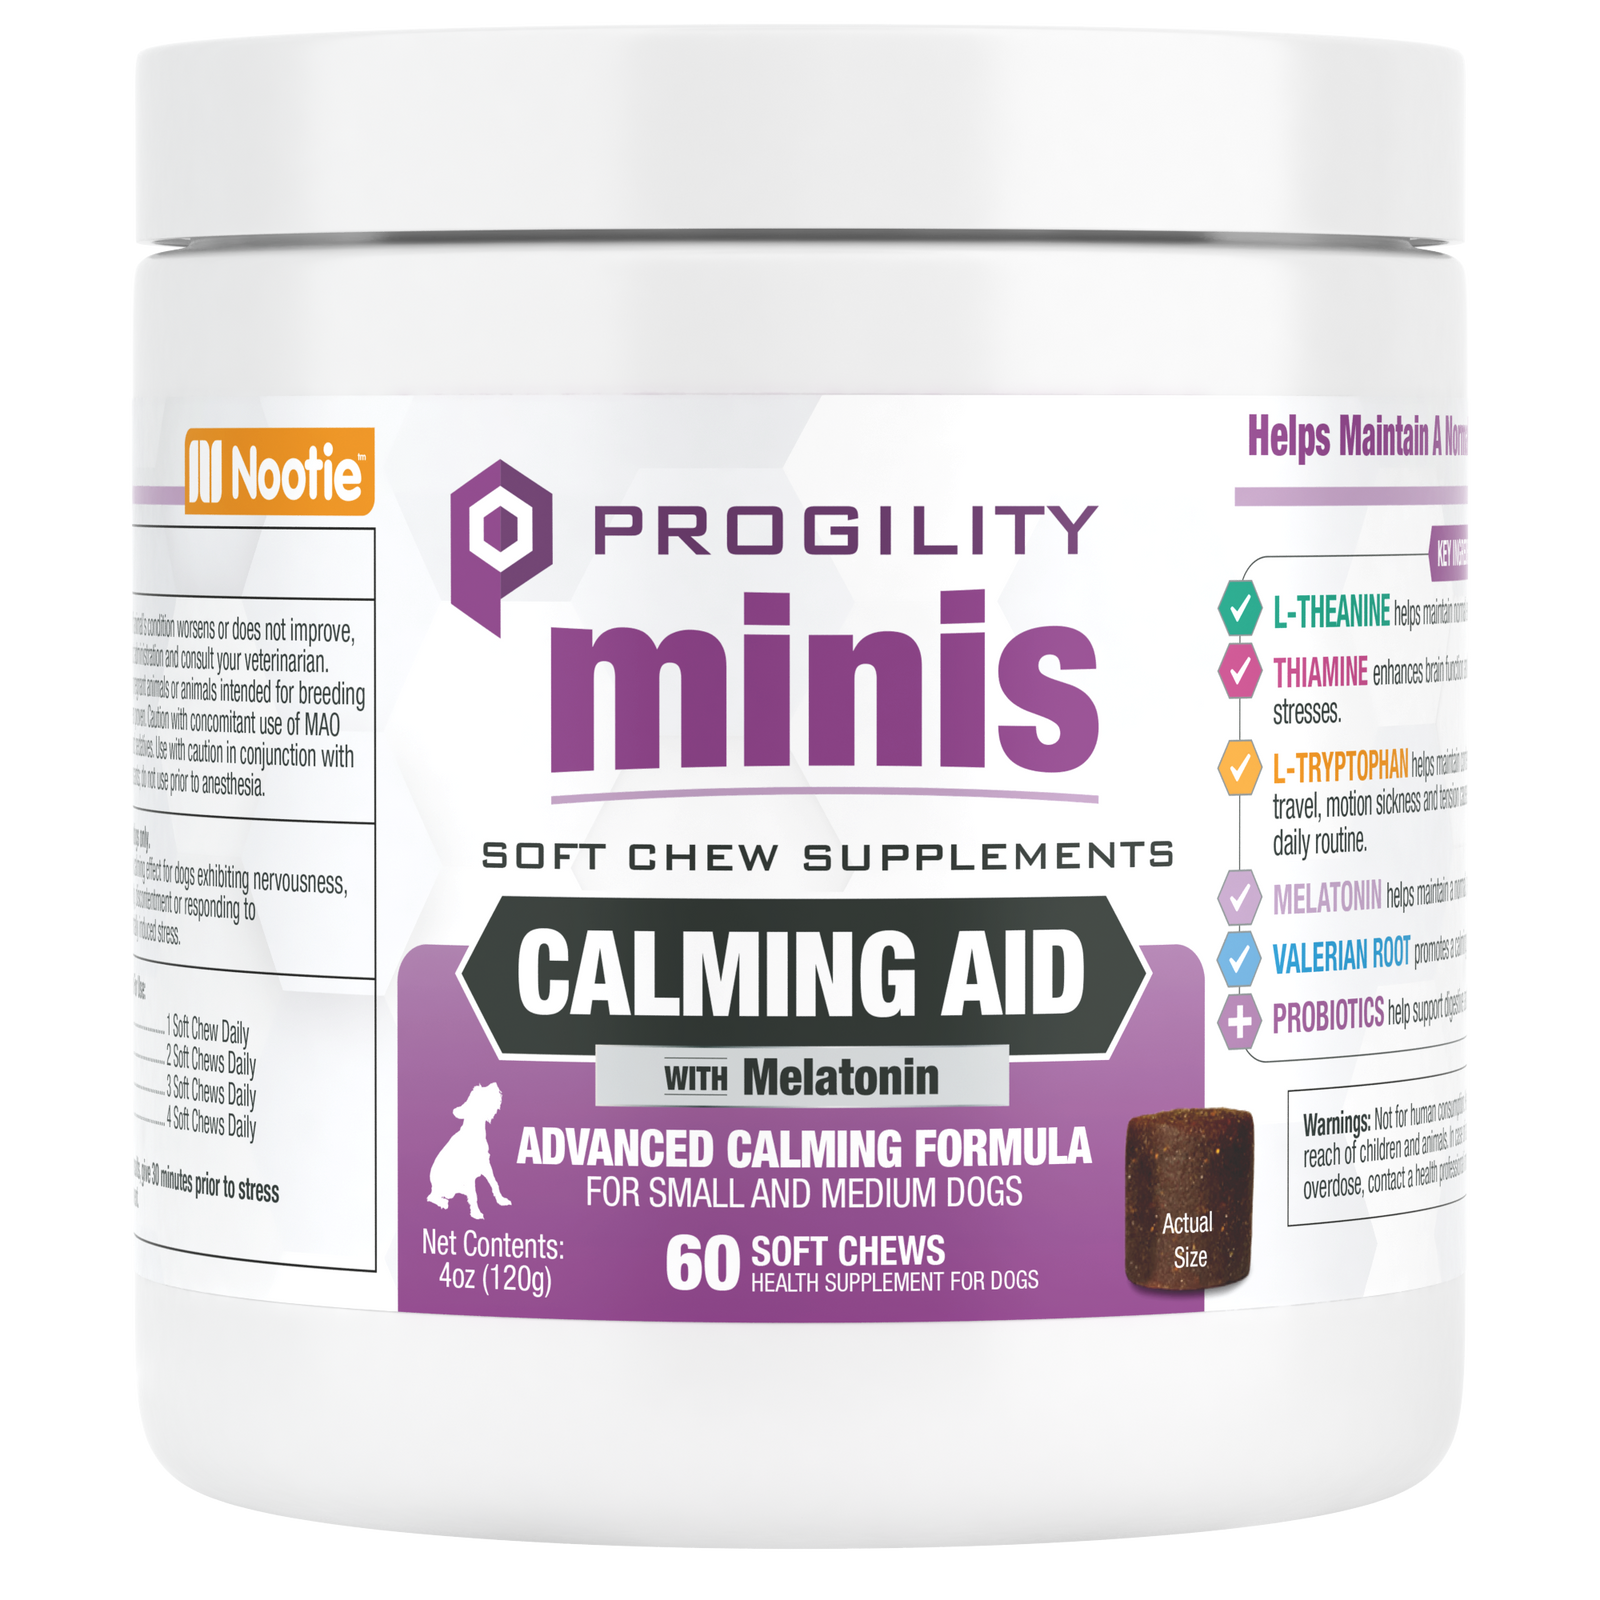 Progility Minis Calming Aid Soft Chew Supplements | Advanced Calming Formula - For Small and Medium Dogs